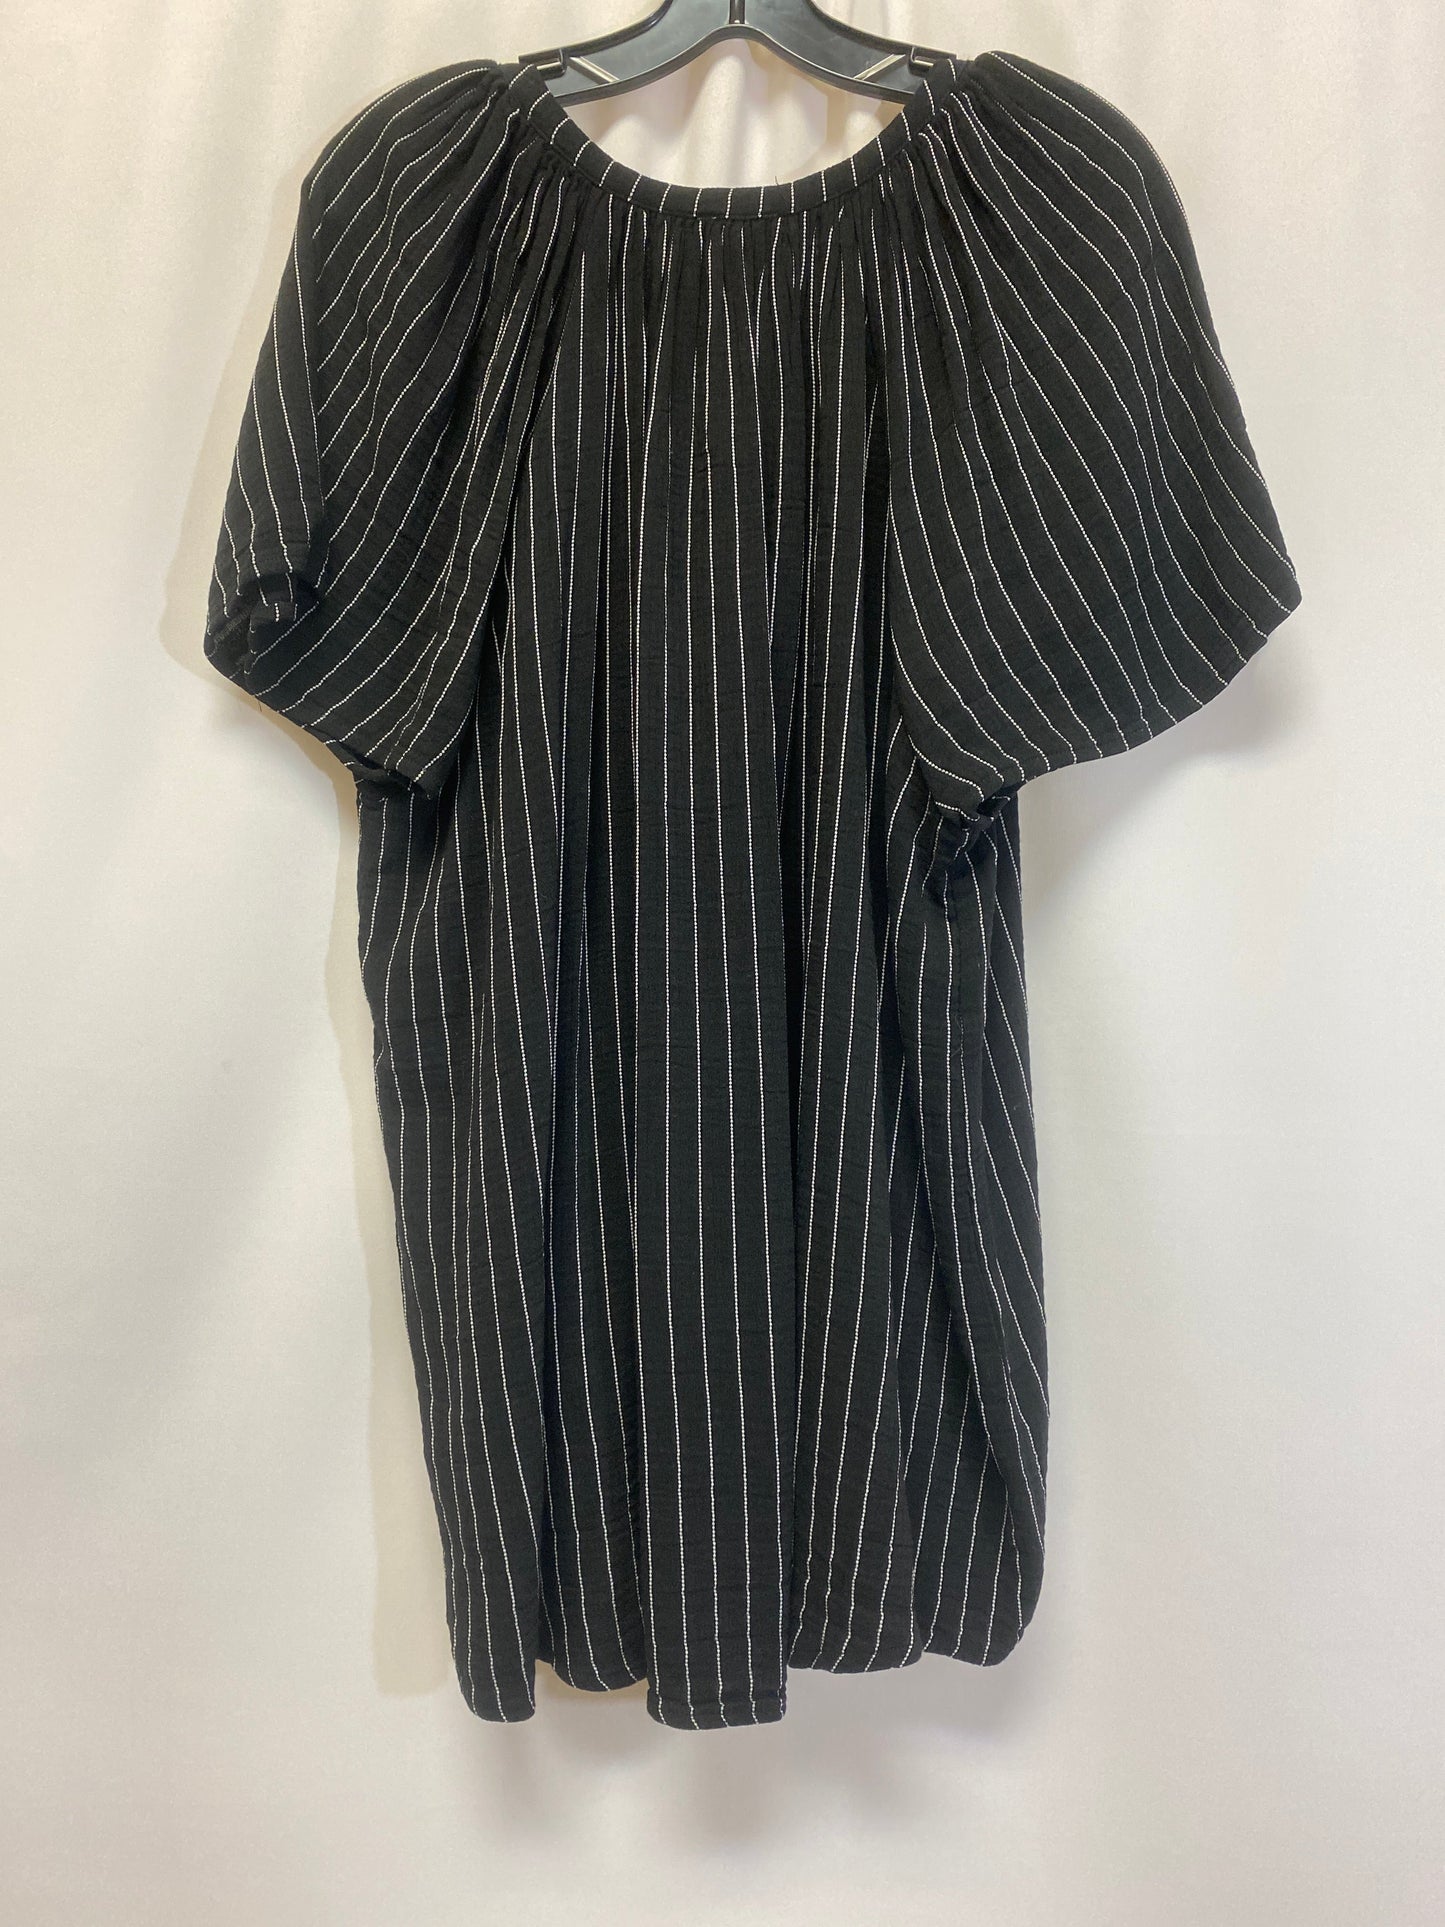 Black & White Top Short Sleeve Joie, Size 2x